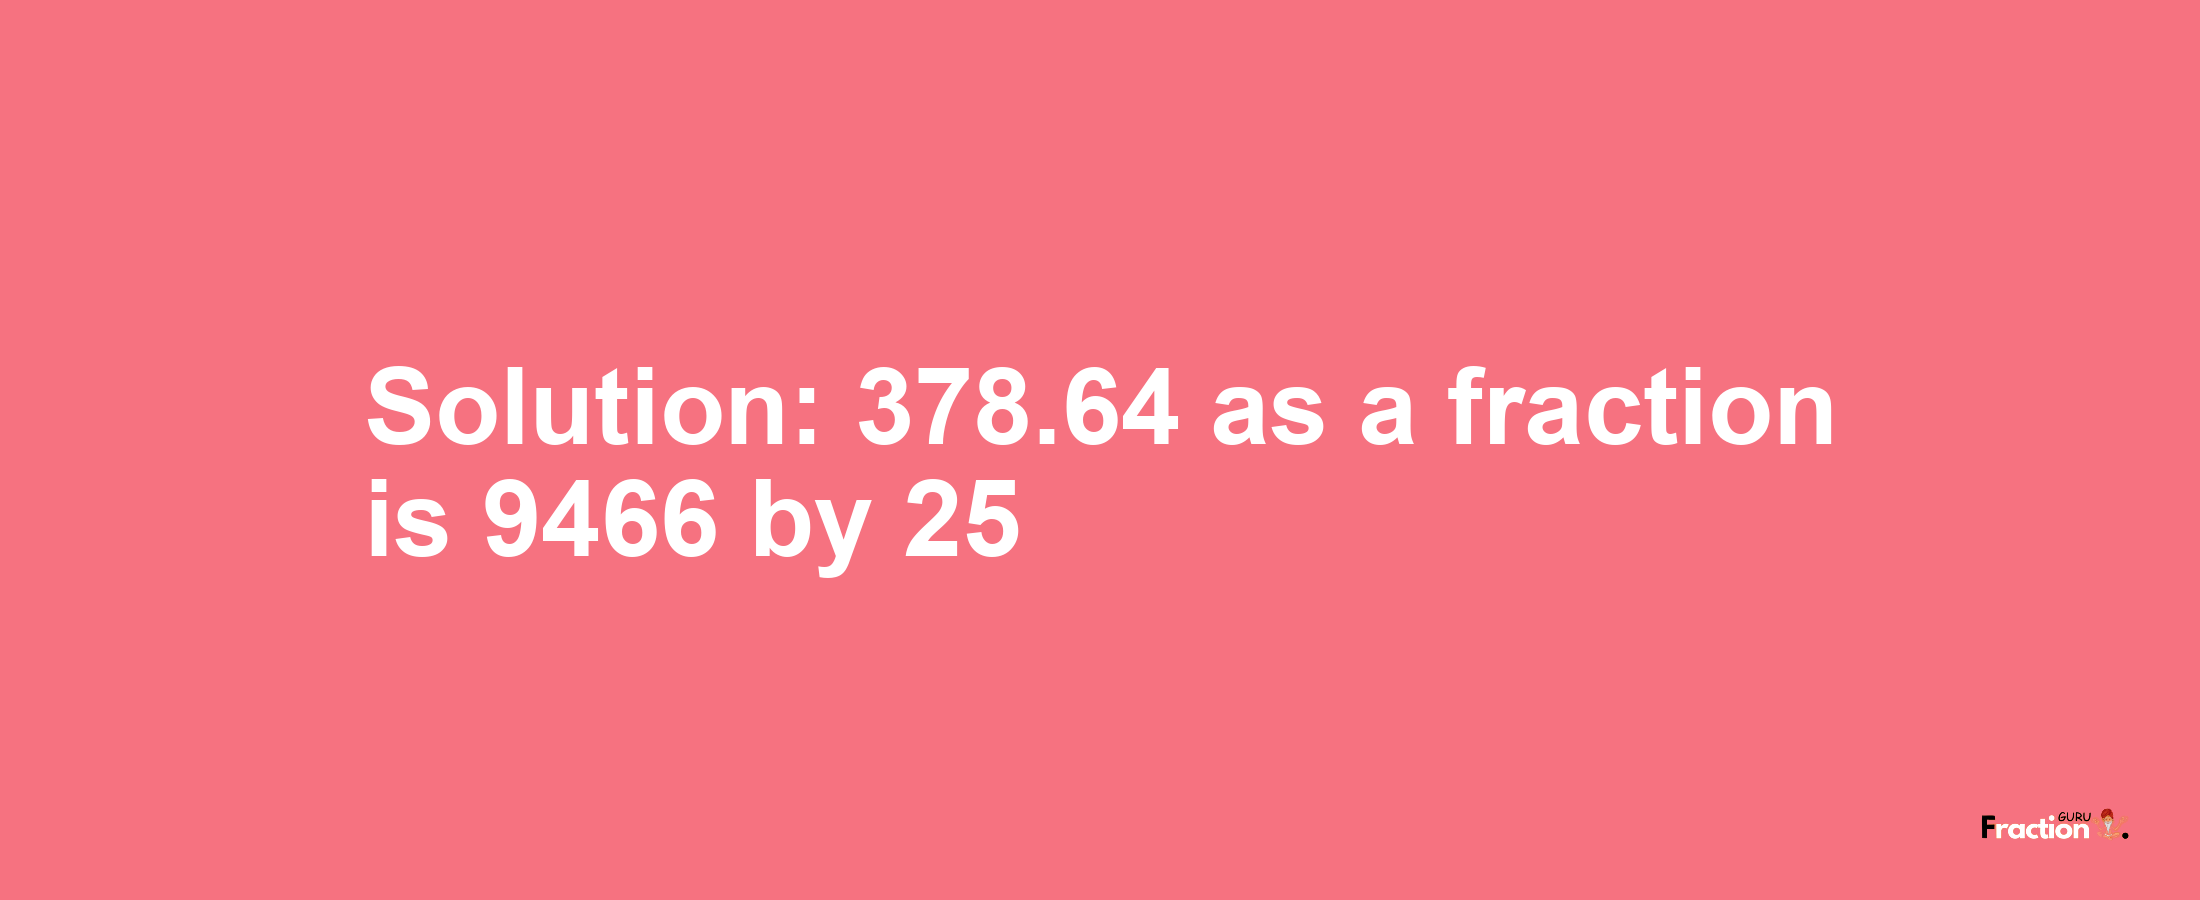 Solution:378.64 as a fraction is 9466/25